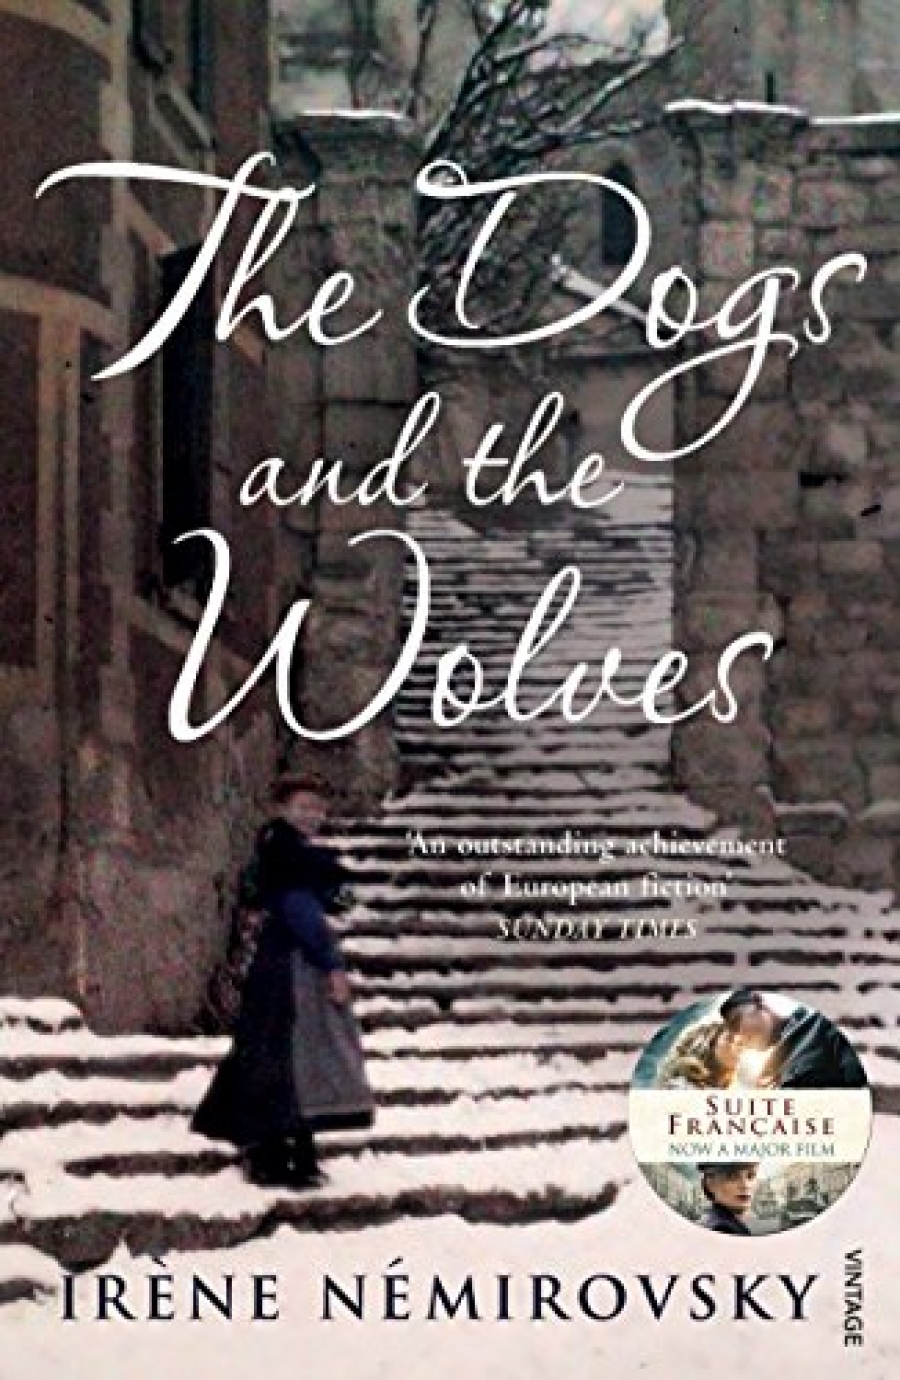 Nemirovsky, Irene Dogs and the Wolves, The 